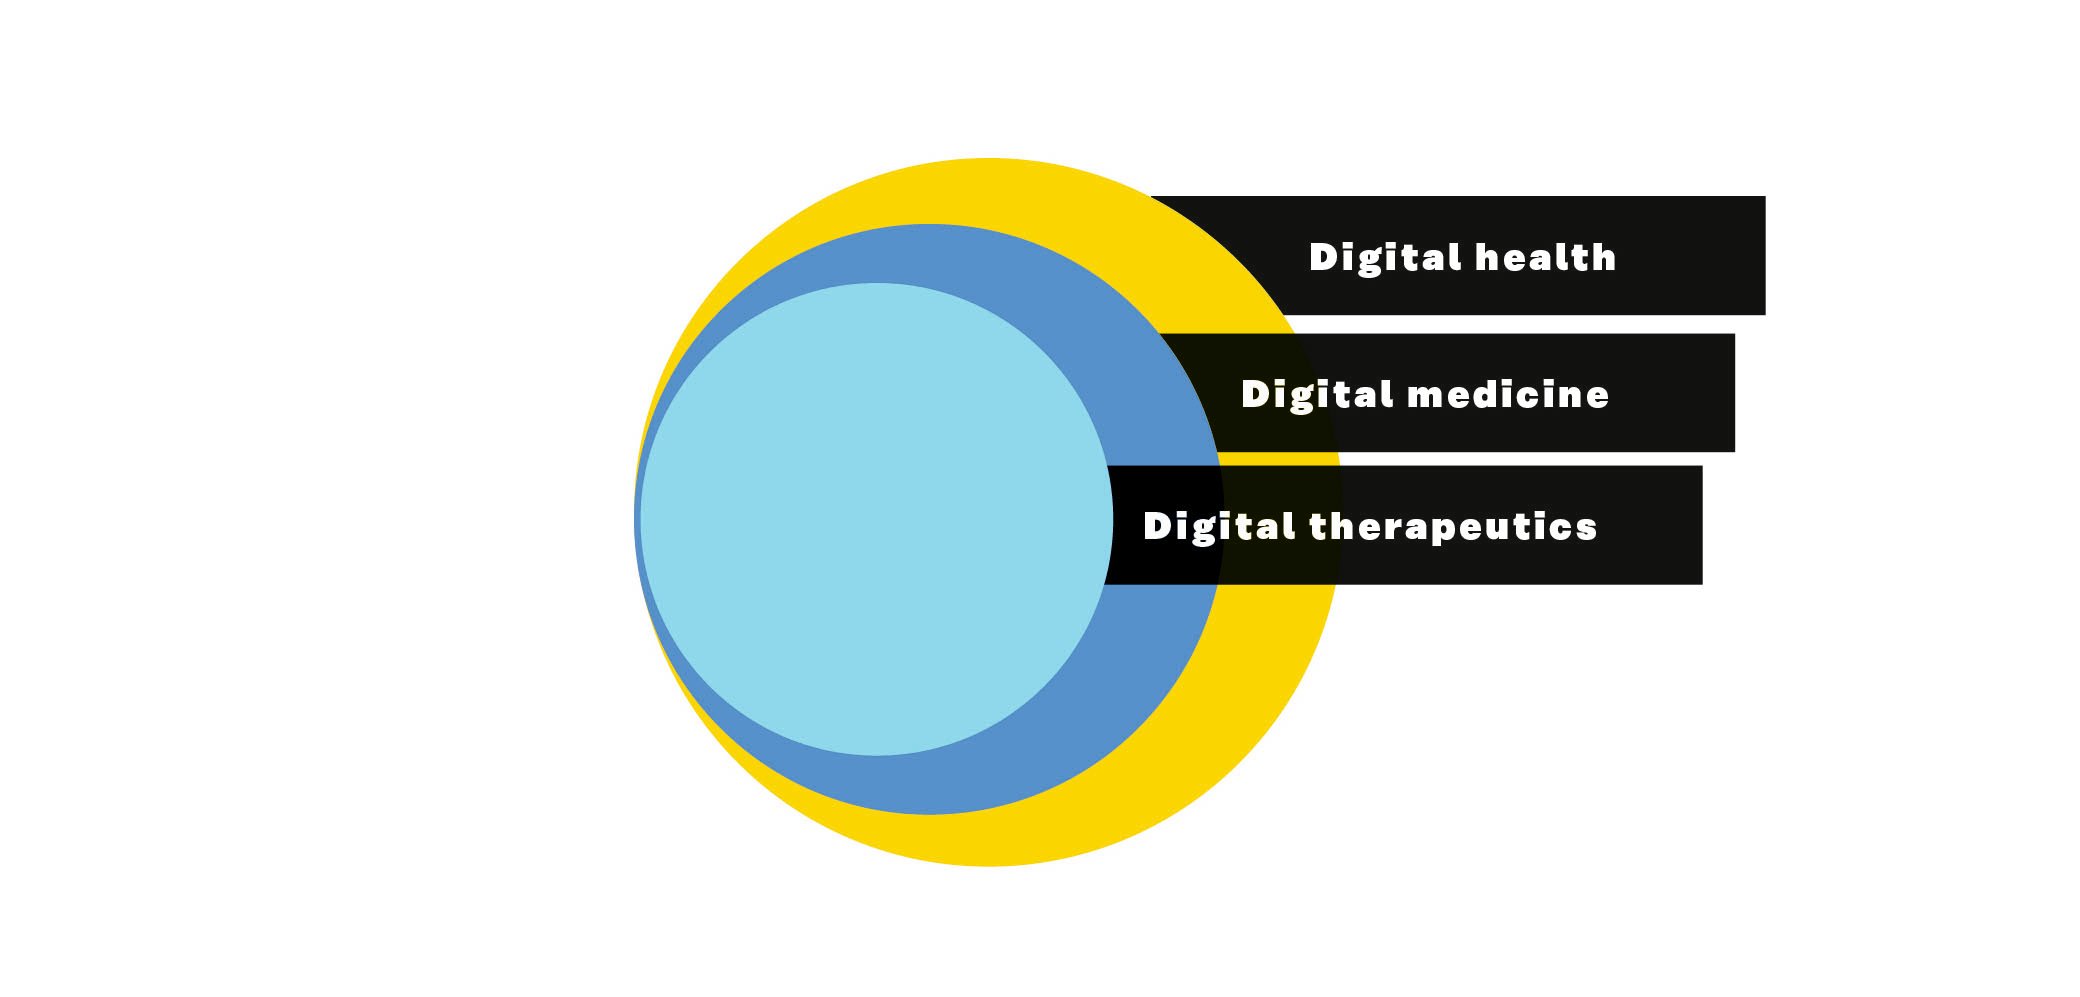 DTx is contained within a concept called digital medicine. Digital medicine is clinically evaluated but does not require real-world results, unlike DTx. Digital medicine, and by extension digital therapeutics, is contained within a larger concept called digital health that includes everything that combines digitality and healthcare.